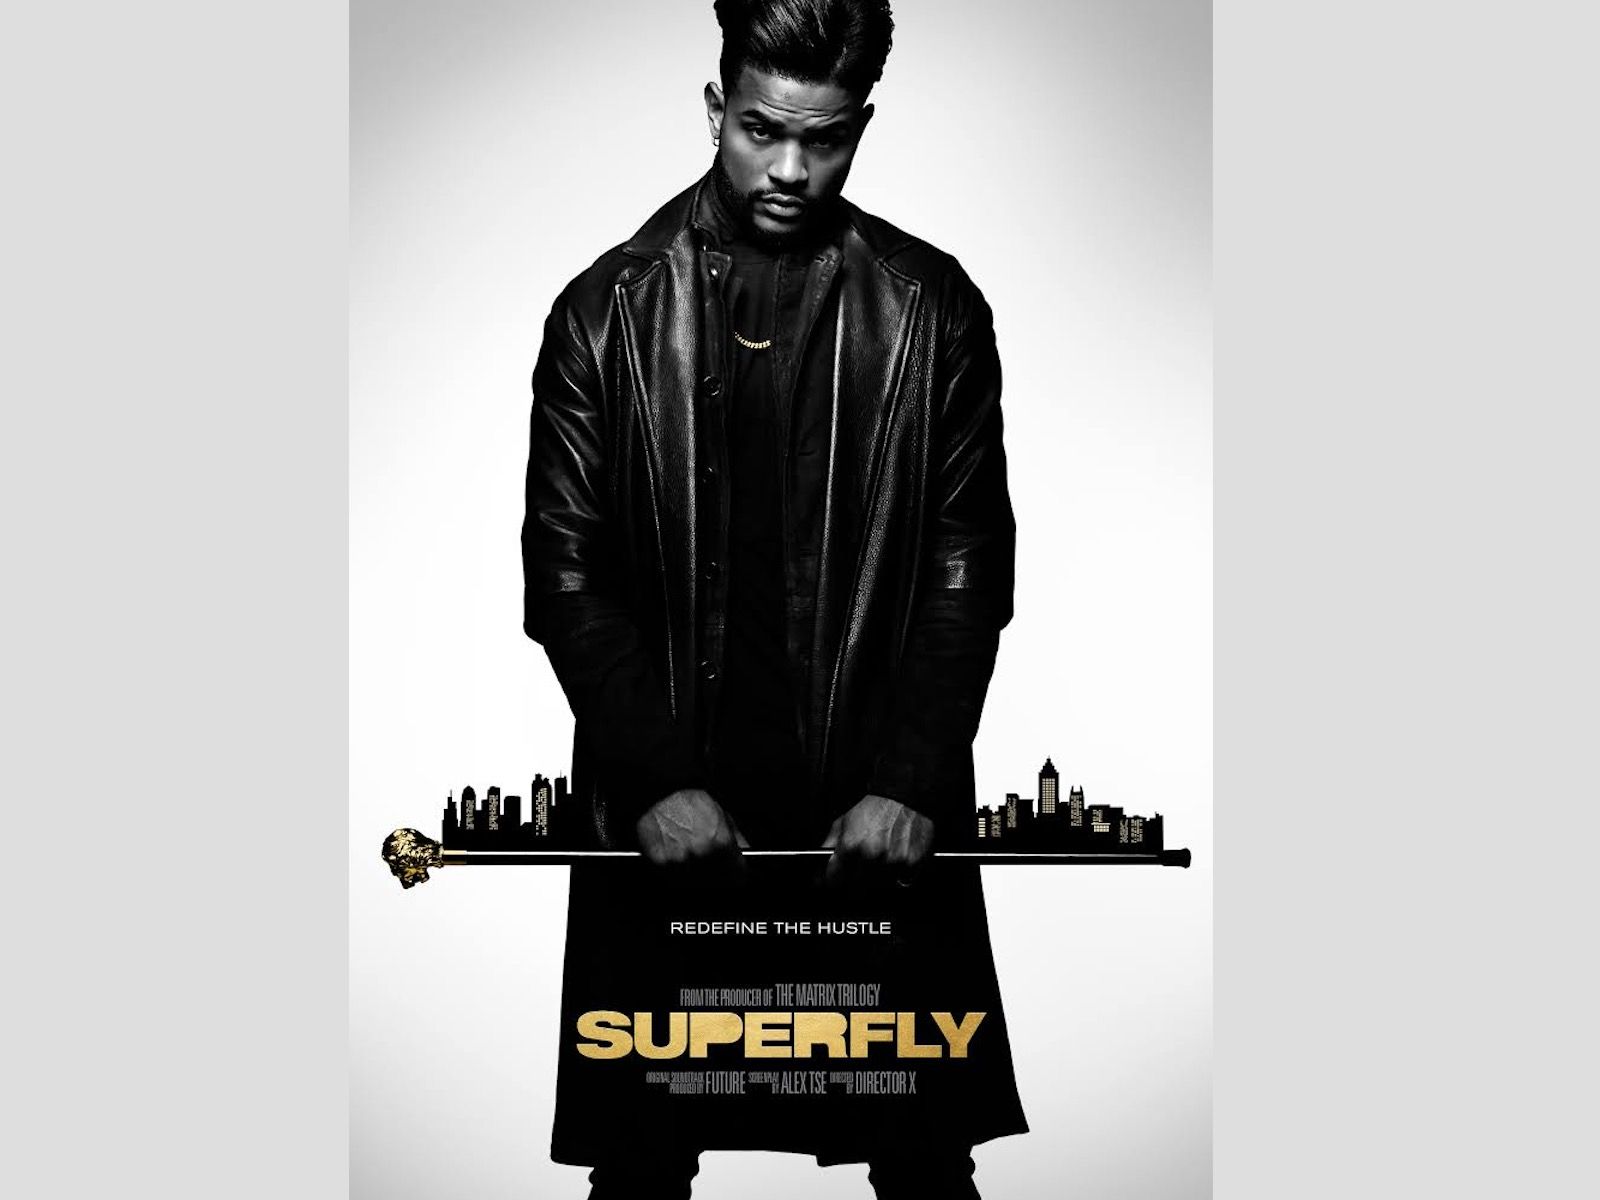 Superfly Movie Wallpapers 4k Hd Superfly Movie Backgrounds On Wallpaperbat